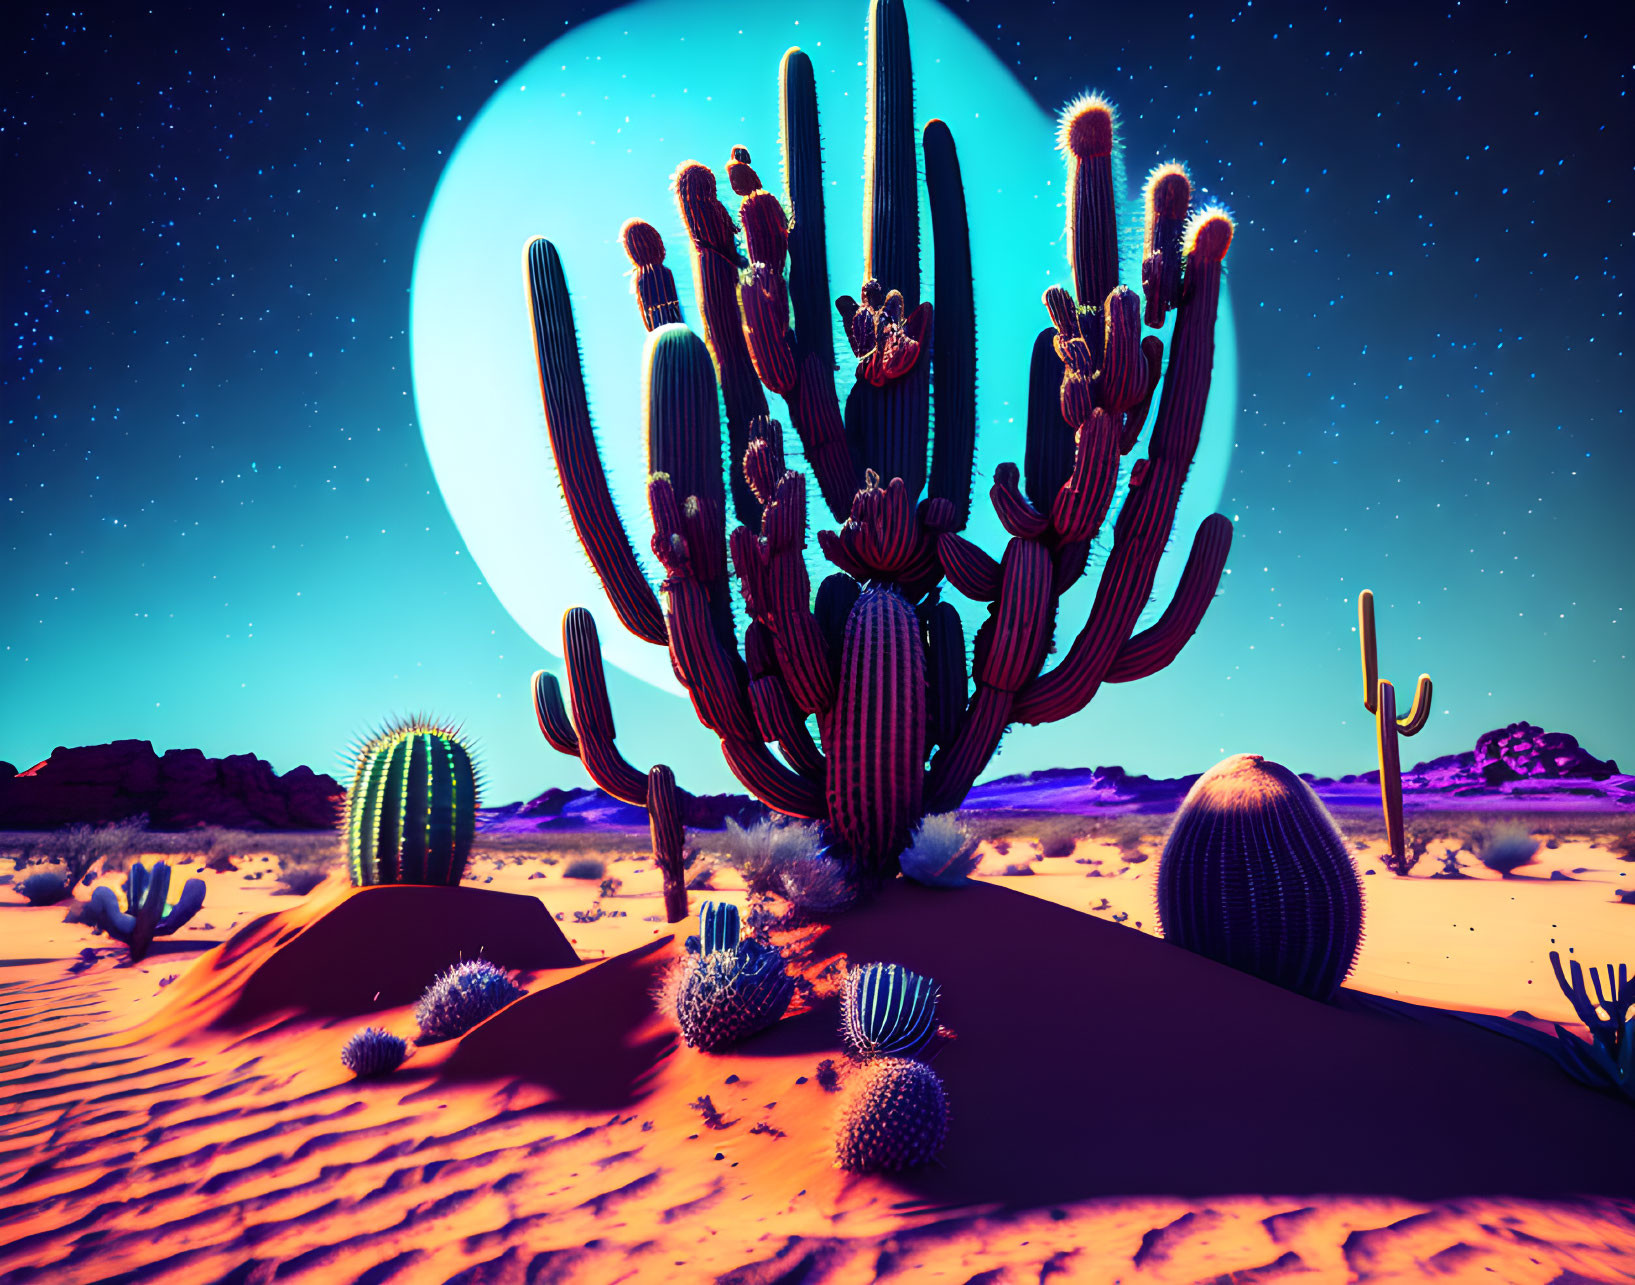 Surreal desert landscape with cacti and luminous moon